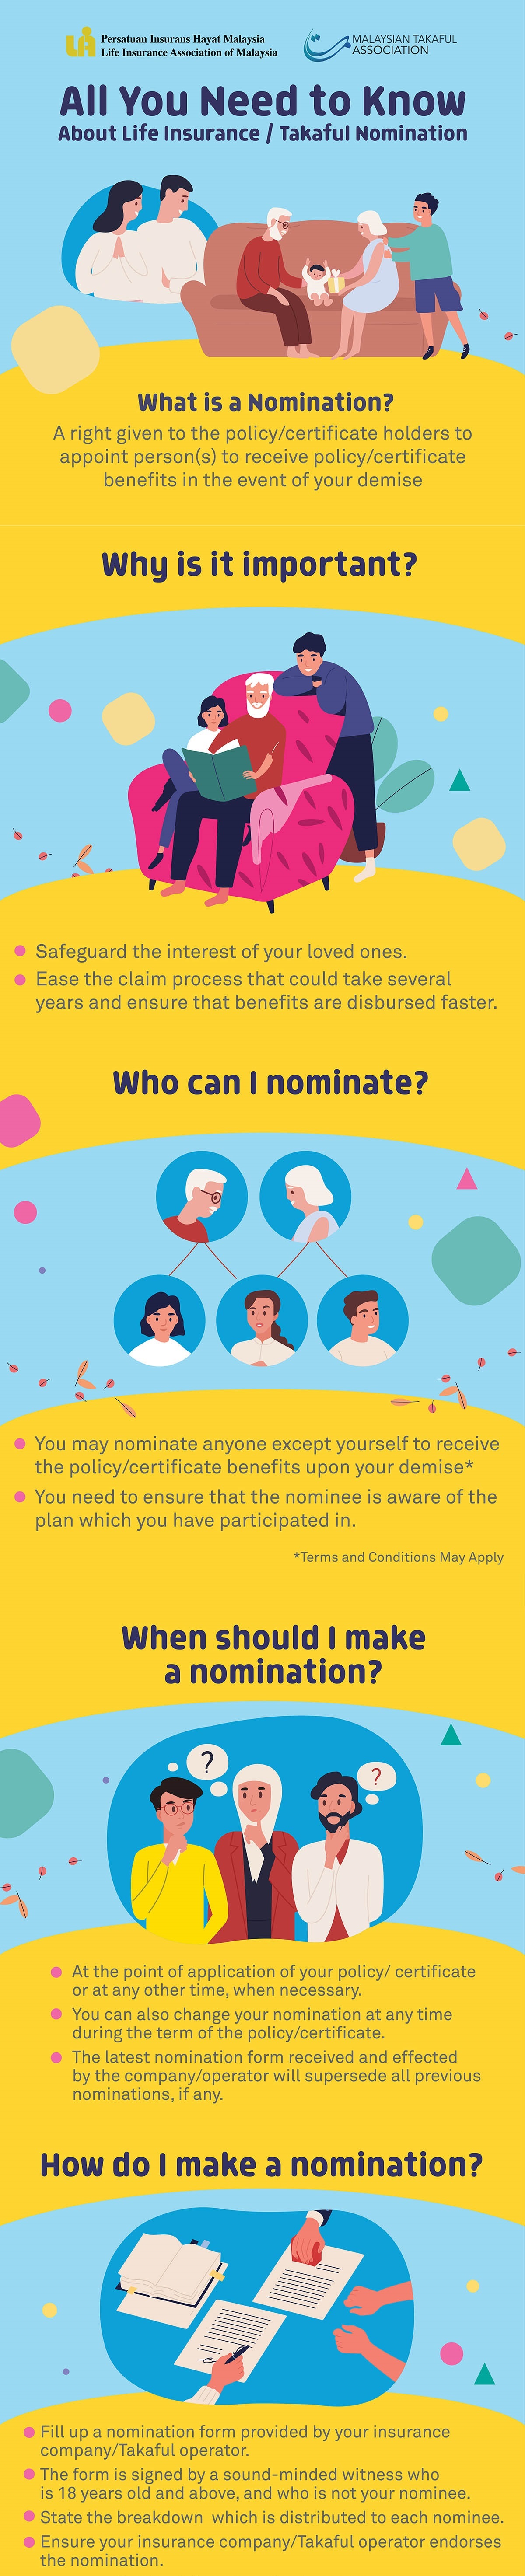 Importance of Making a Nomination (Life Insurance) | Corporate